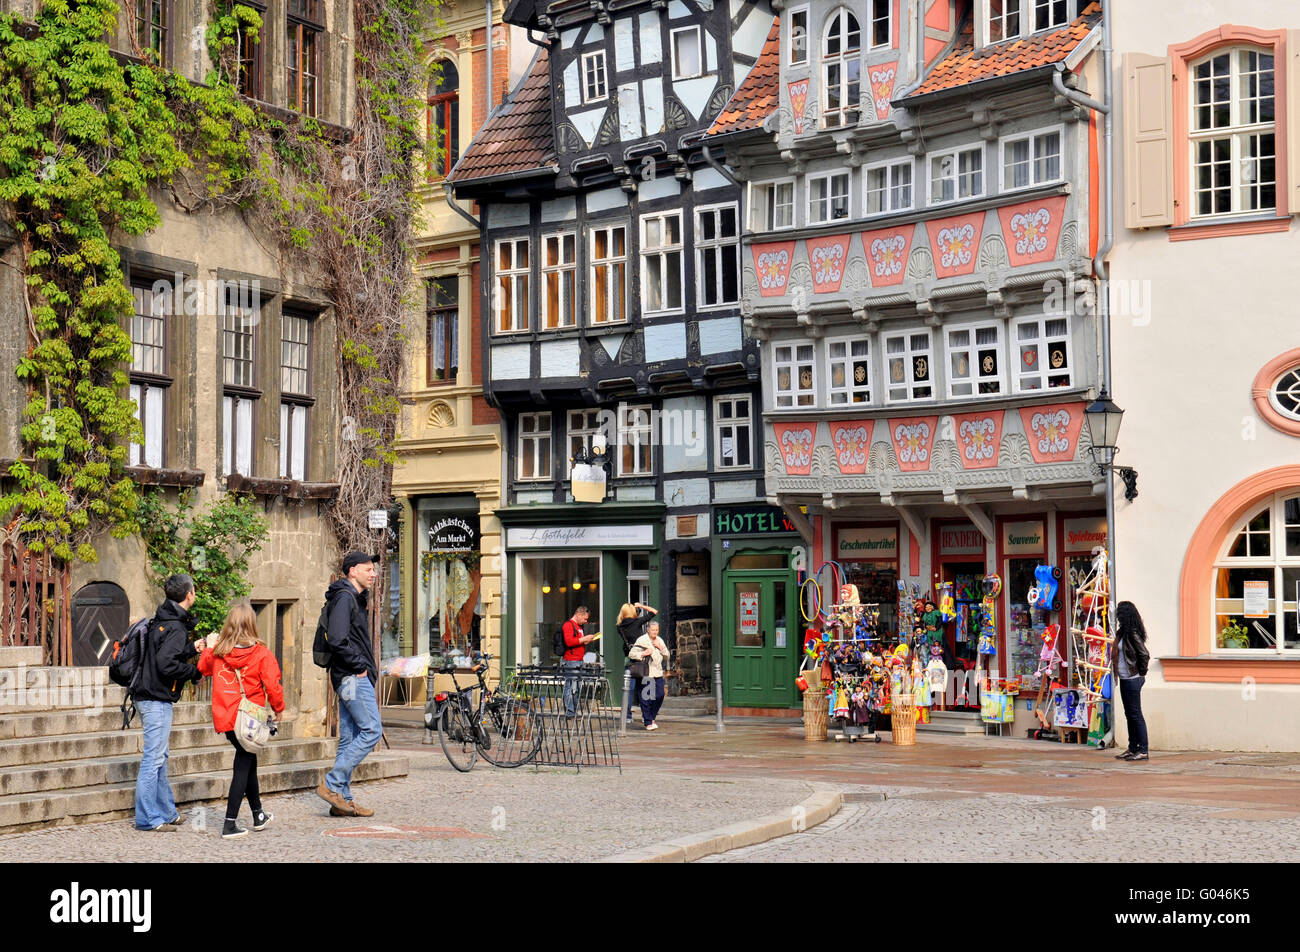 Town hall, market place, old town, Quedlinburg, Harz, Saxony-Anhalt, Germany Stock Photo